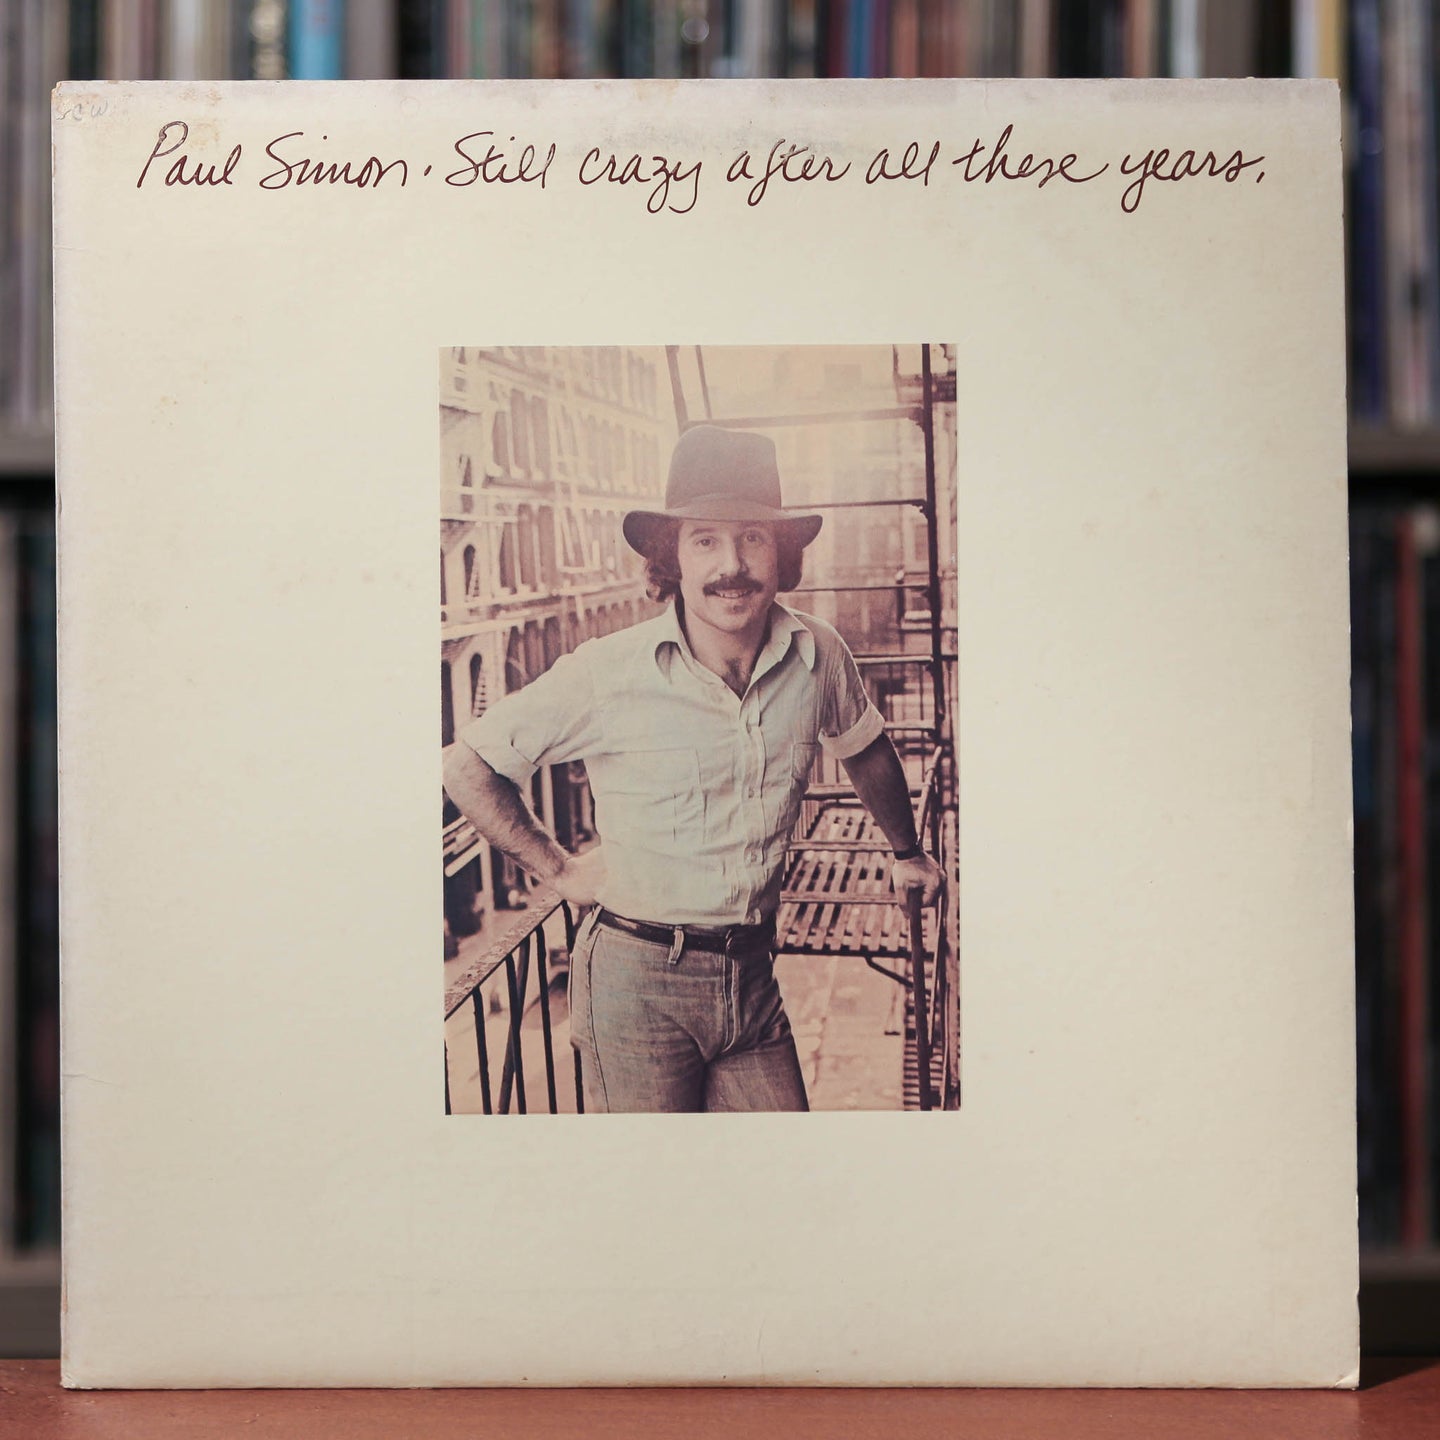 Paul Simon - Still Crazy After All These Years - CBS 1975, VG+/VG+